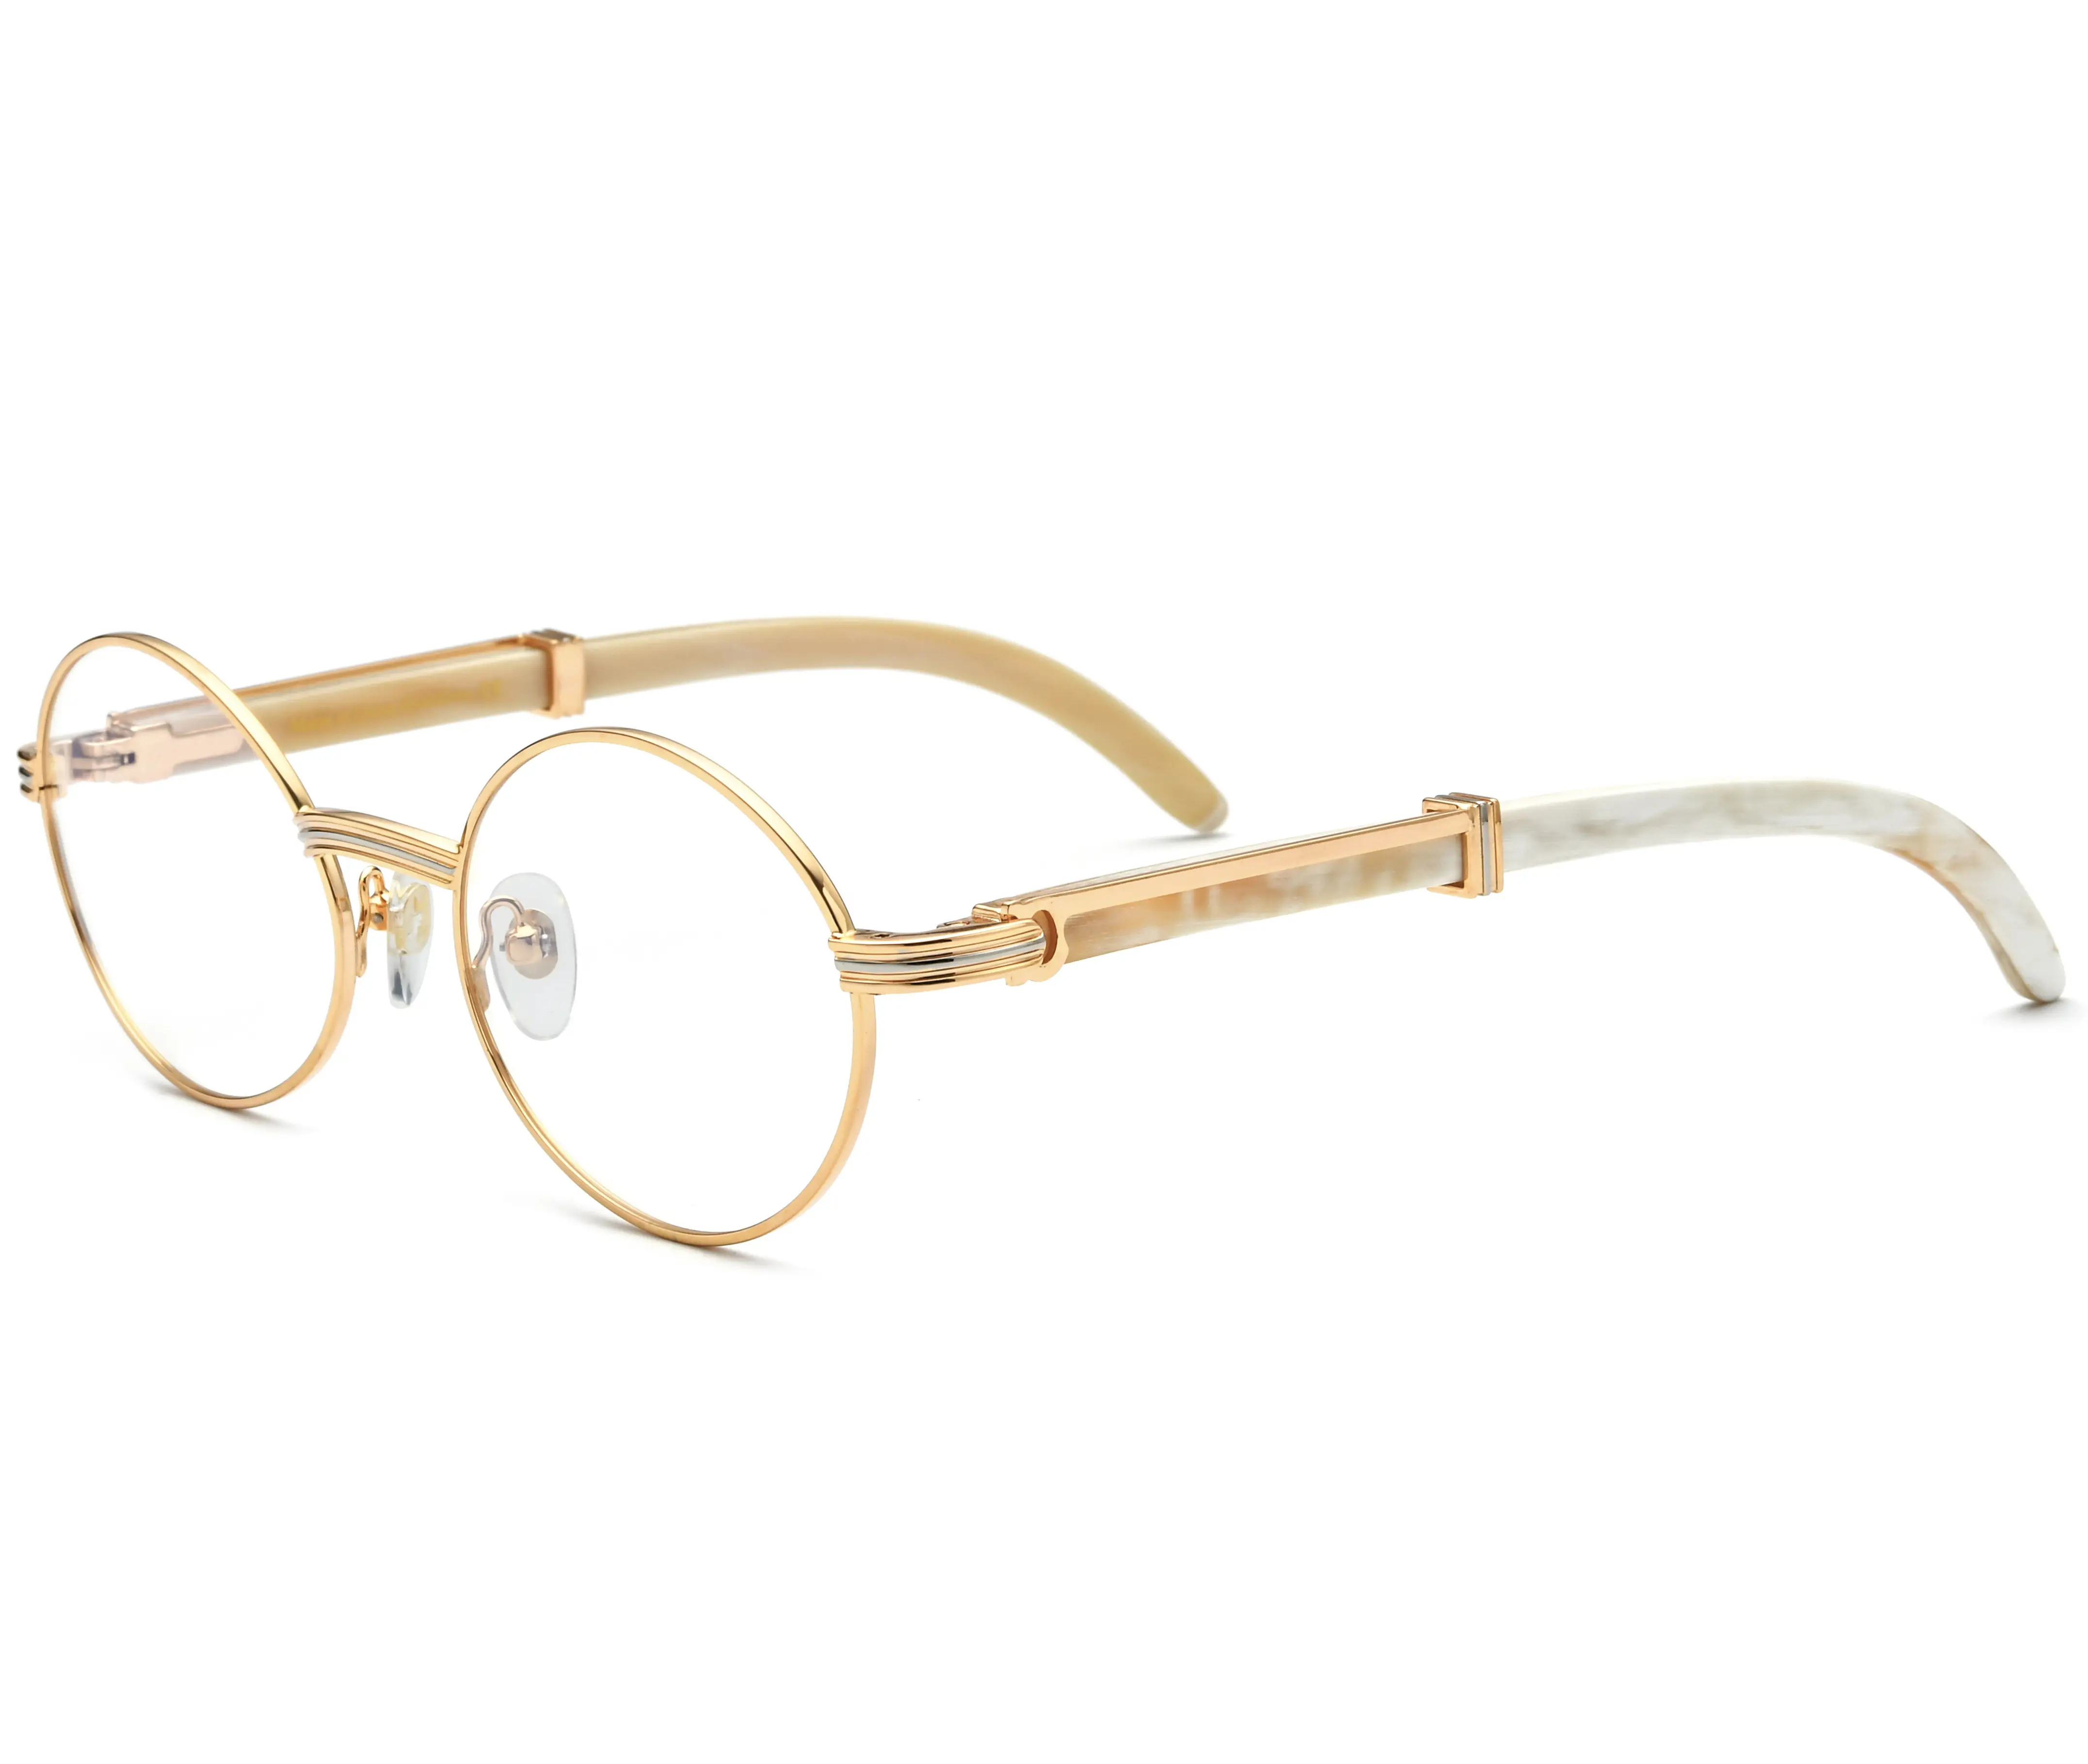 The latest design of ox horn pattern extremely fine frame glasses frame